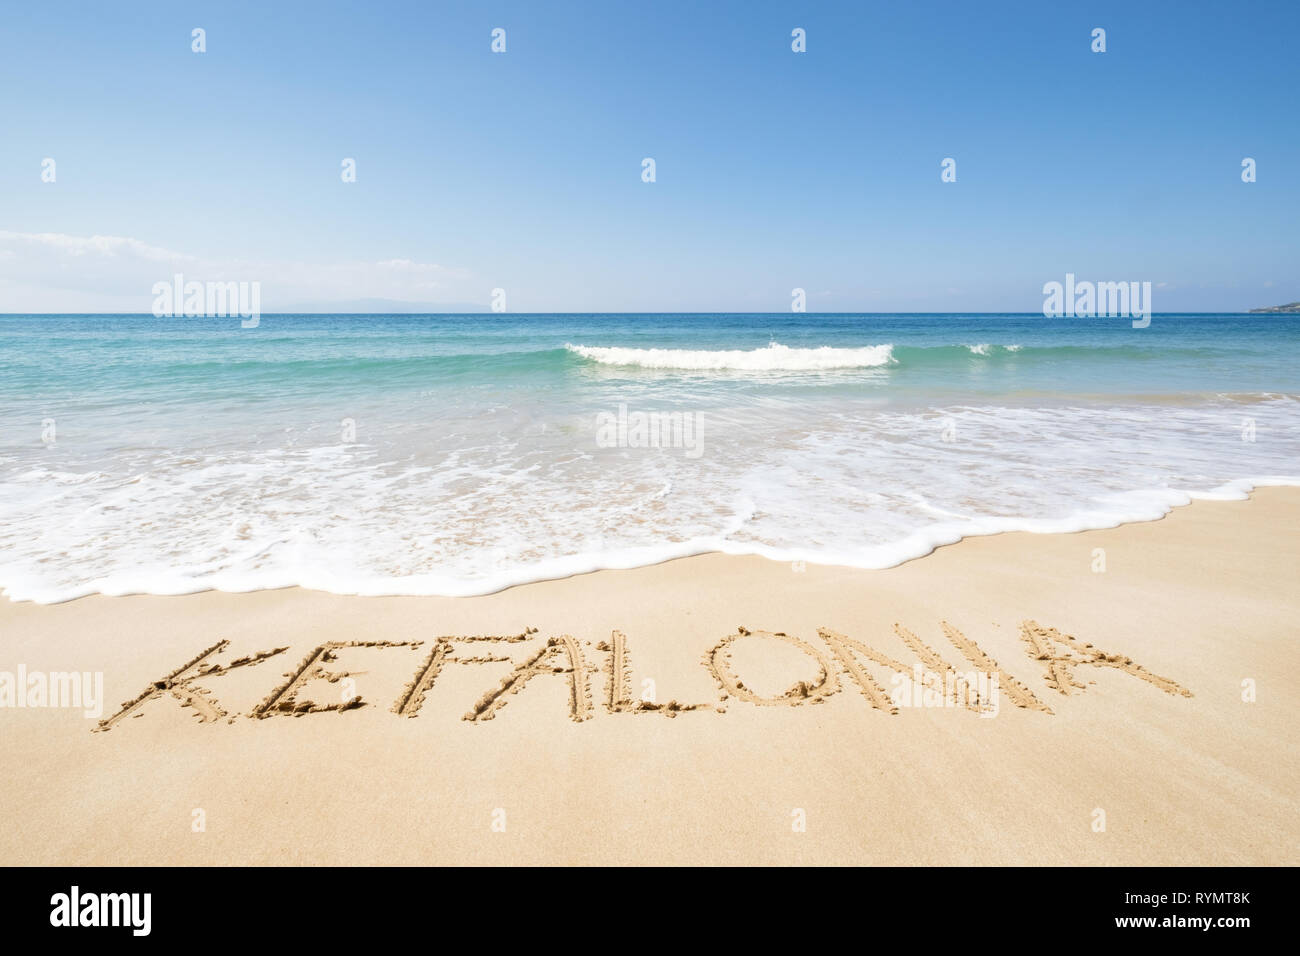 Kefalonia written in the sand from Trapezaki Beach looking out at the Ionian Sea in Kefalonia, Greece. Stock Photo